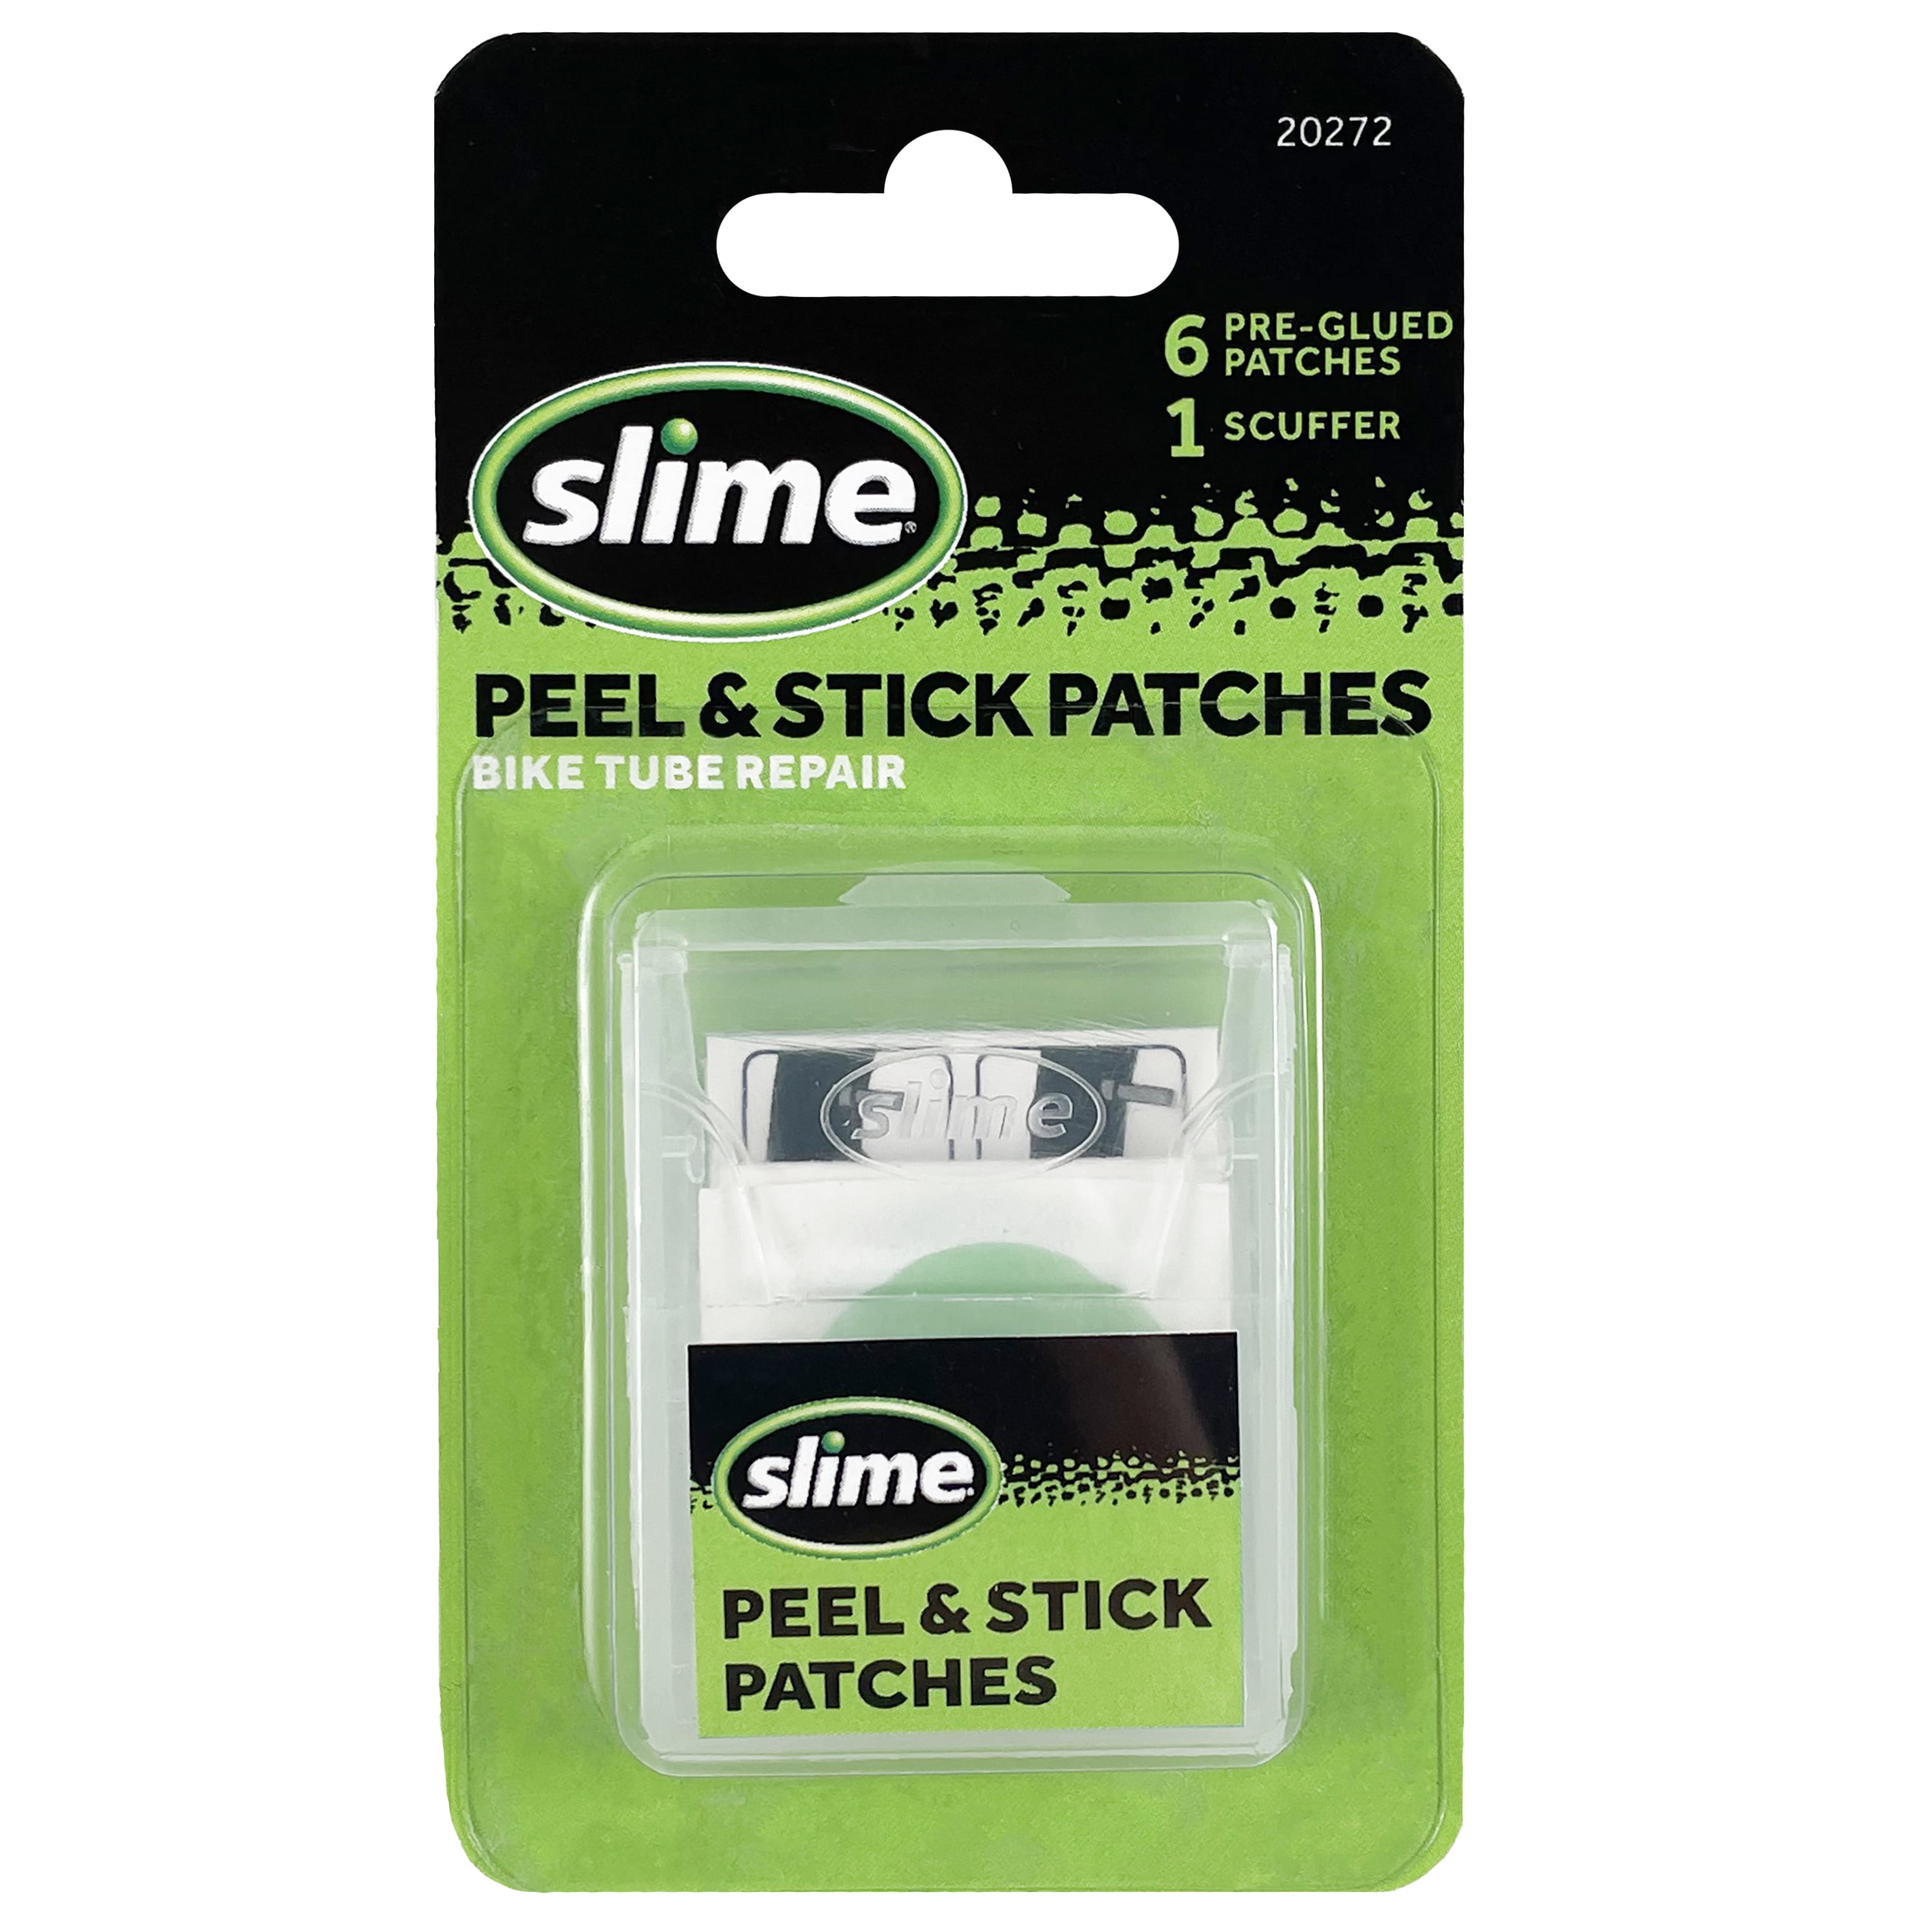 Slime Peel & Stick Bicycle Tube Patches, 6pc - 20272